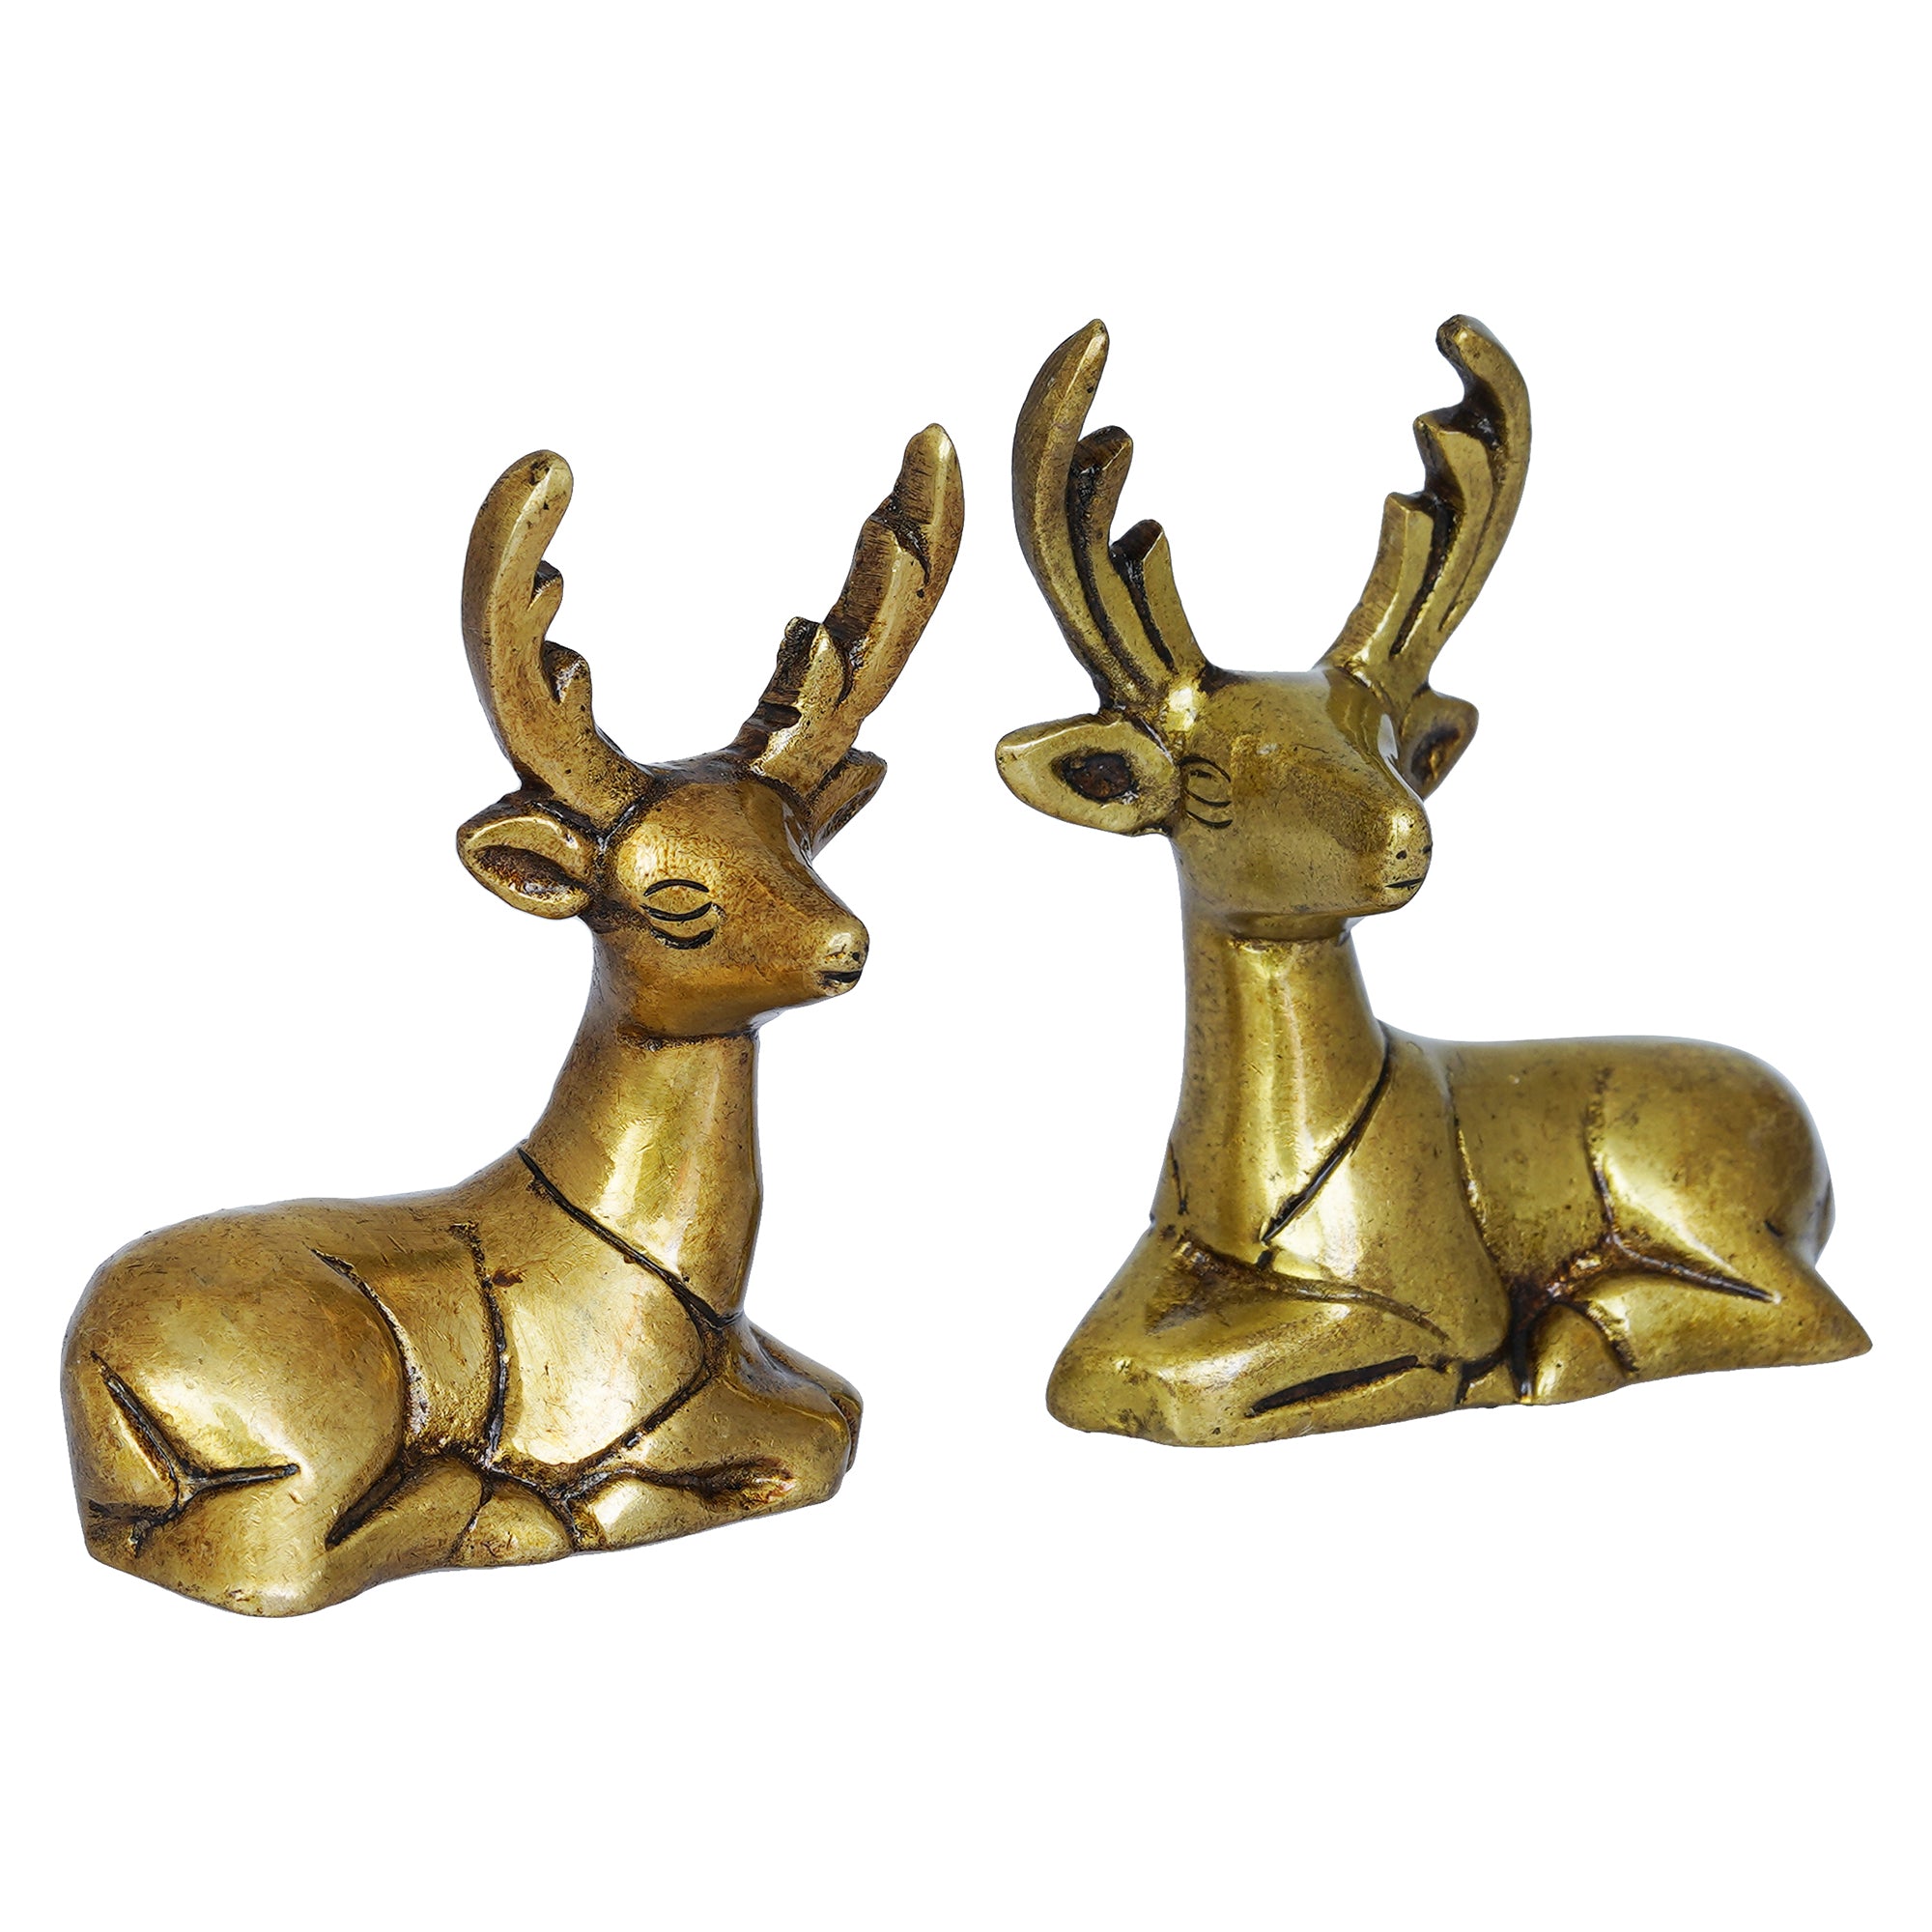 Set of 2 Golden Brass Deer Statues Showpieces - Animal Figurines for Home Decoration - Gift for Christmas, Winter Festivities, and Holiday Celebrations 6